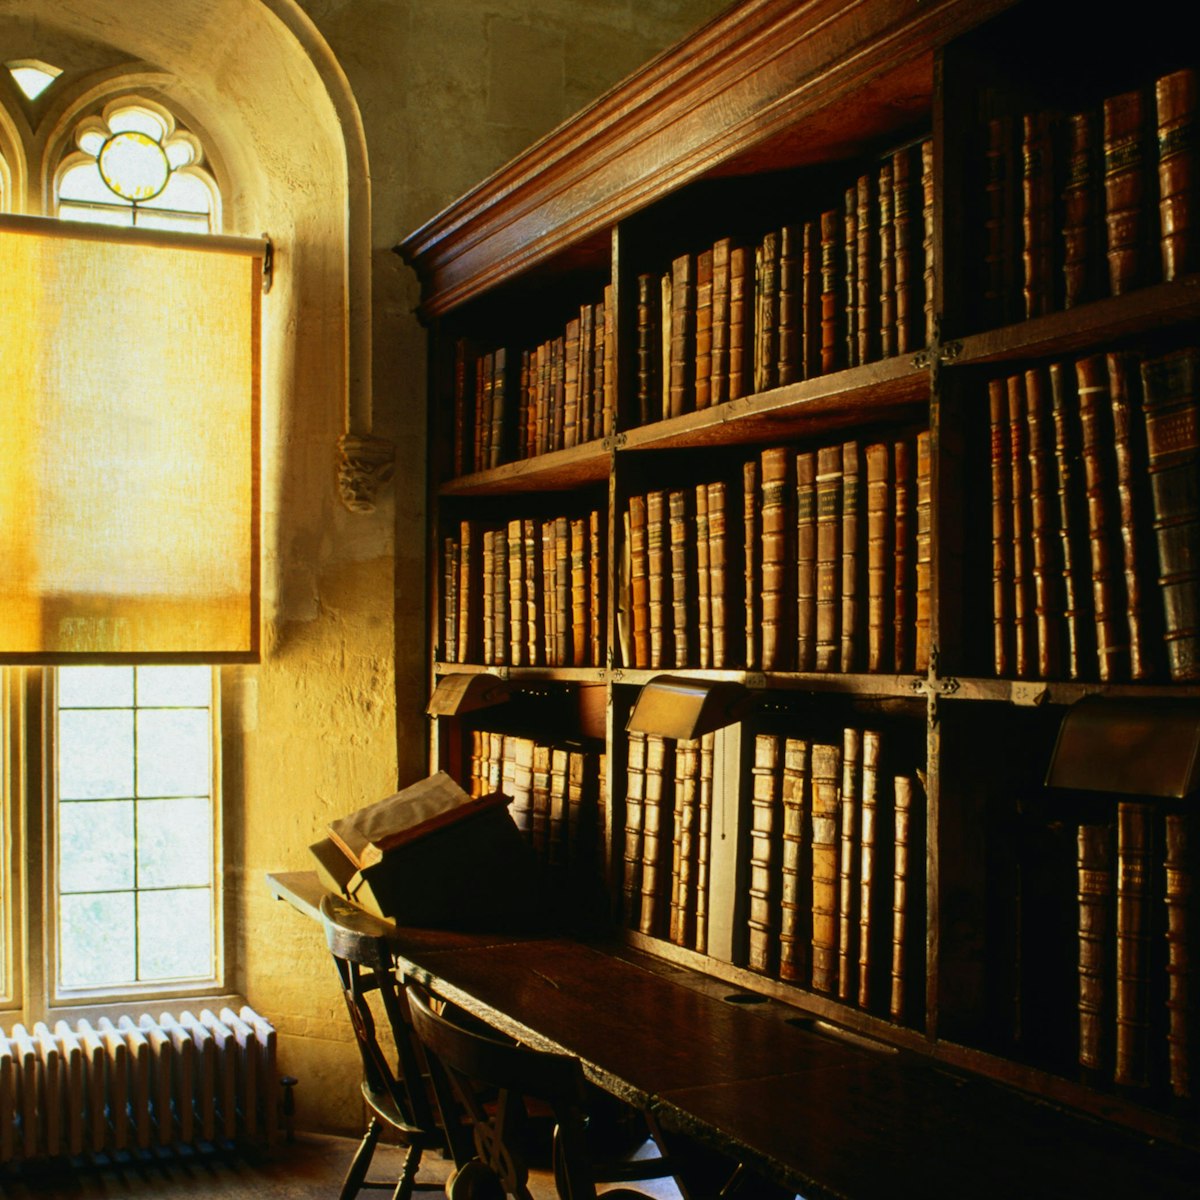 Duke Humfrey's library, the Bodleian Library